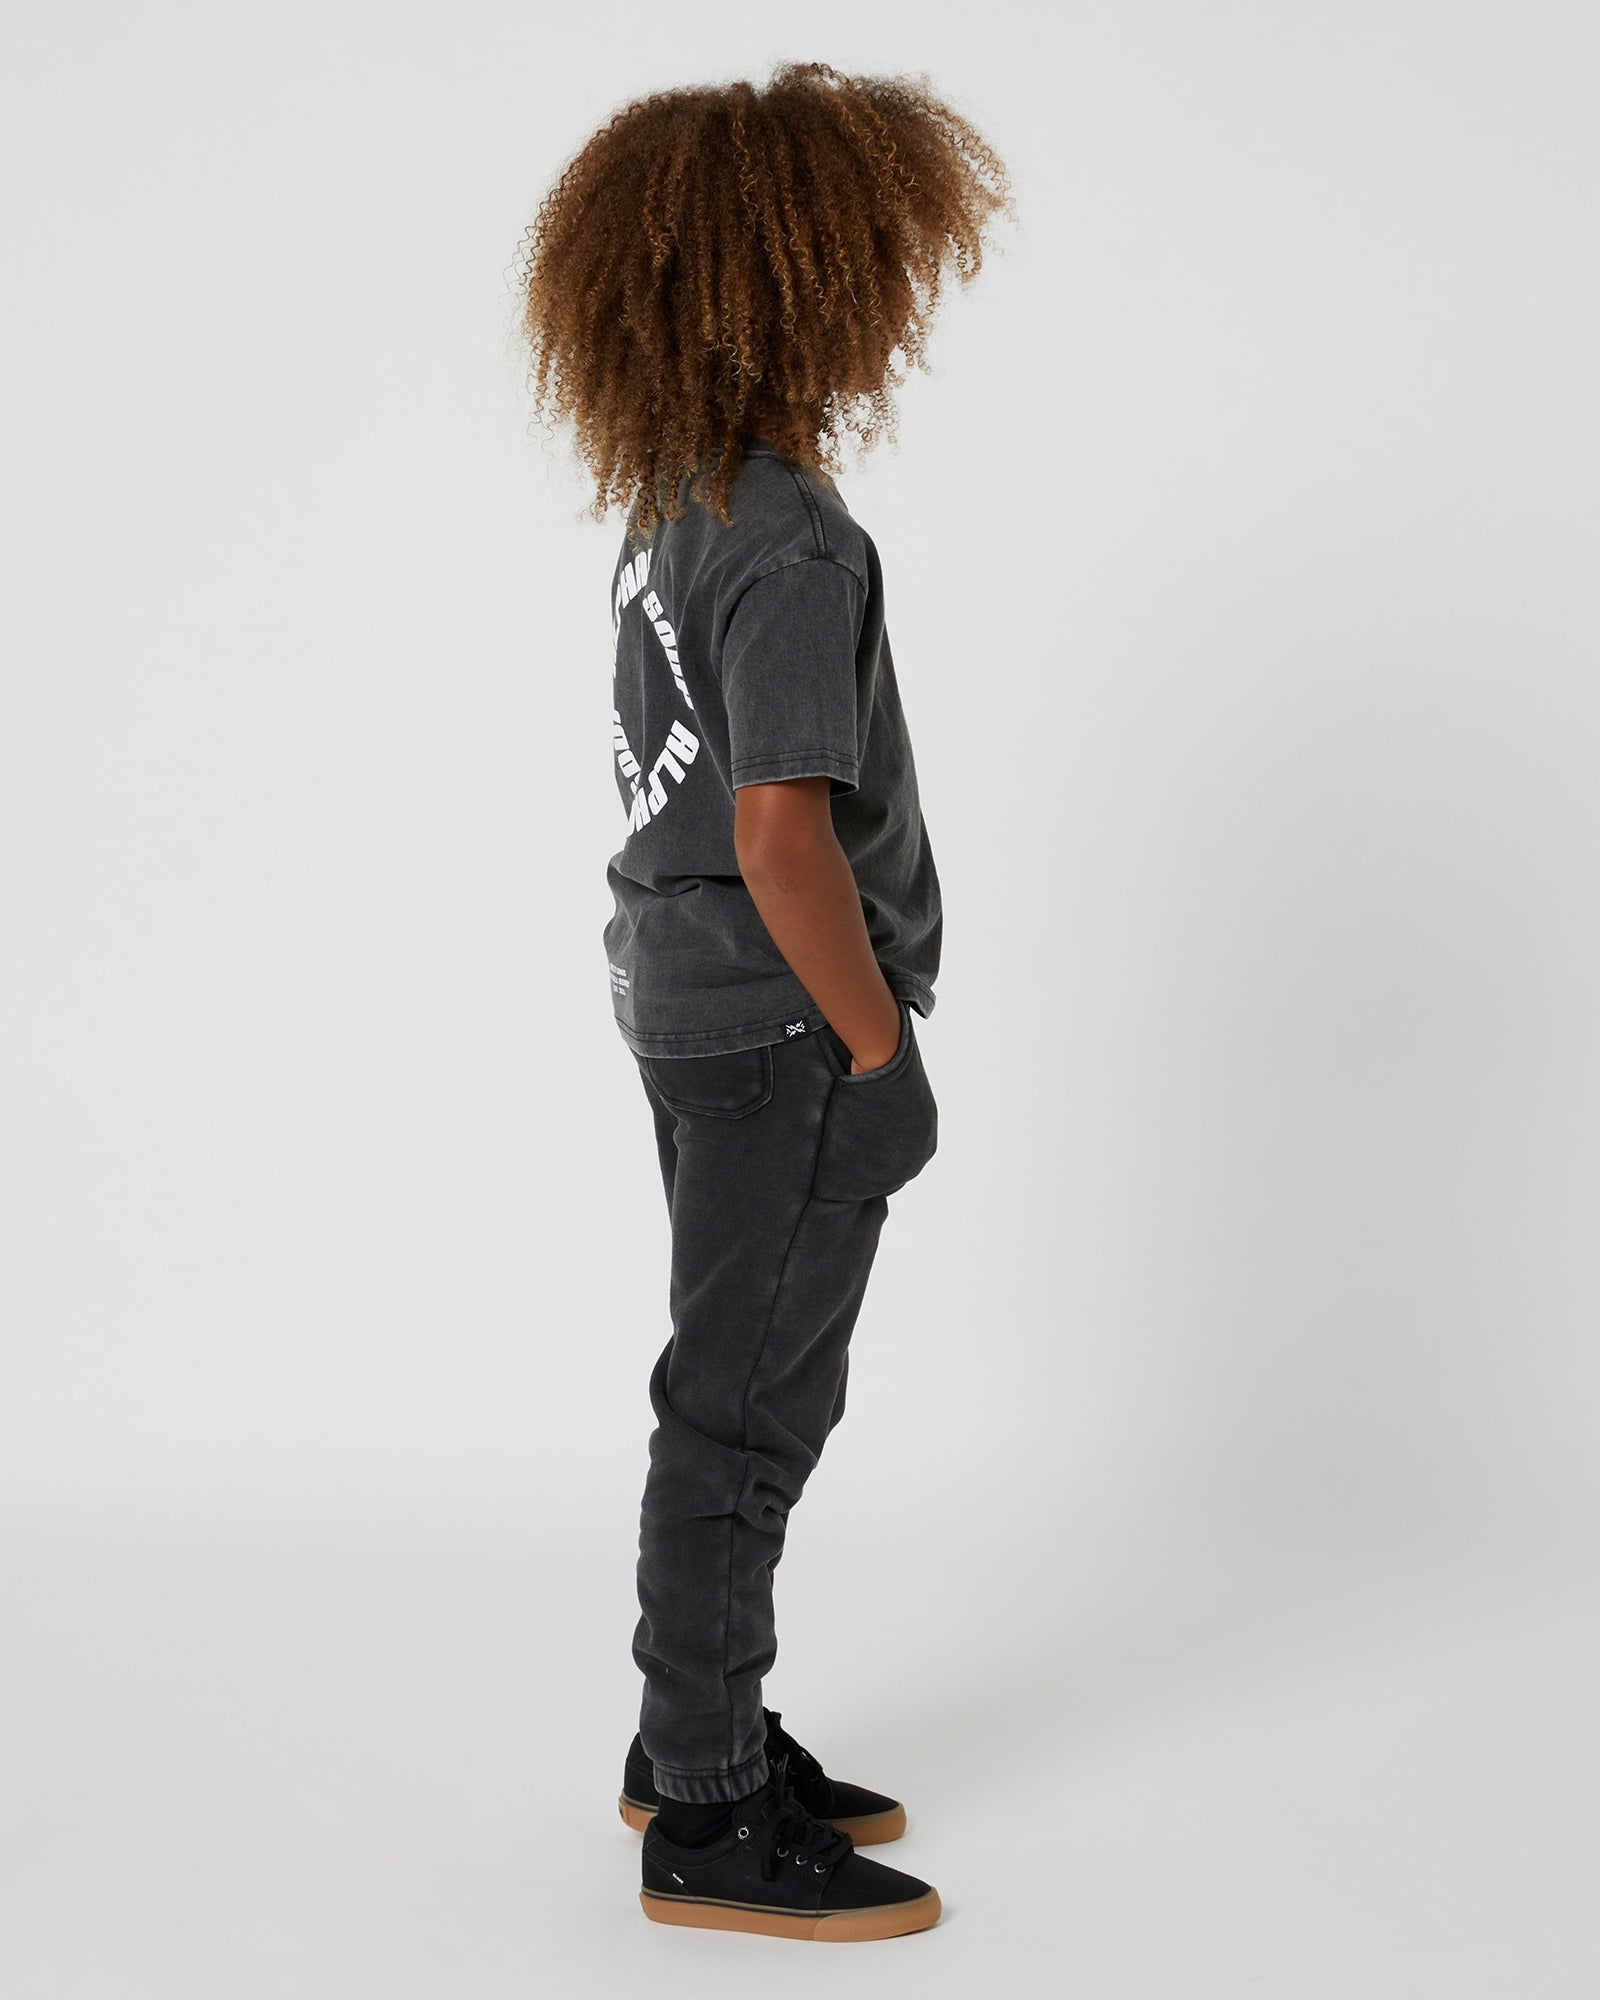 Kids San Clemente Trackpant in Steel Grey by Alphabet Soup featuring a vintage garment dye wash, heavy brushed back fleece, and puff print design on the front leg create the perfect blend of comfort and style. Elasticated waist and ribbed cuff ankles ensure an all-day fit.